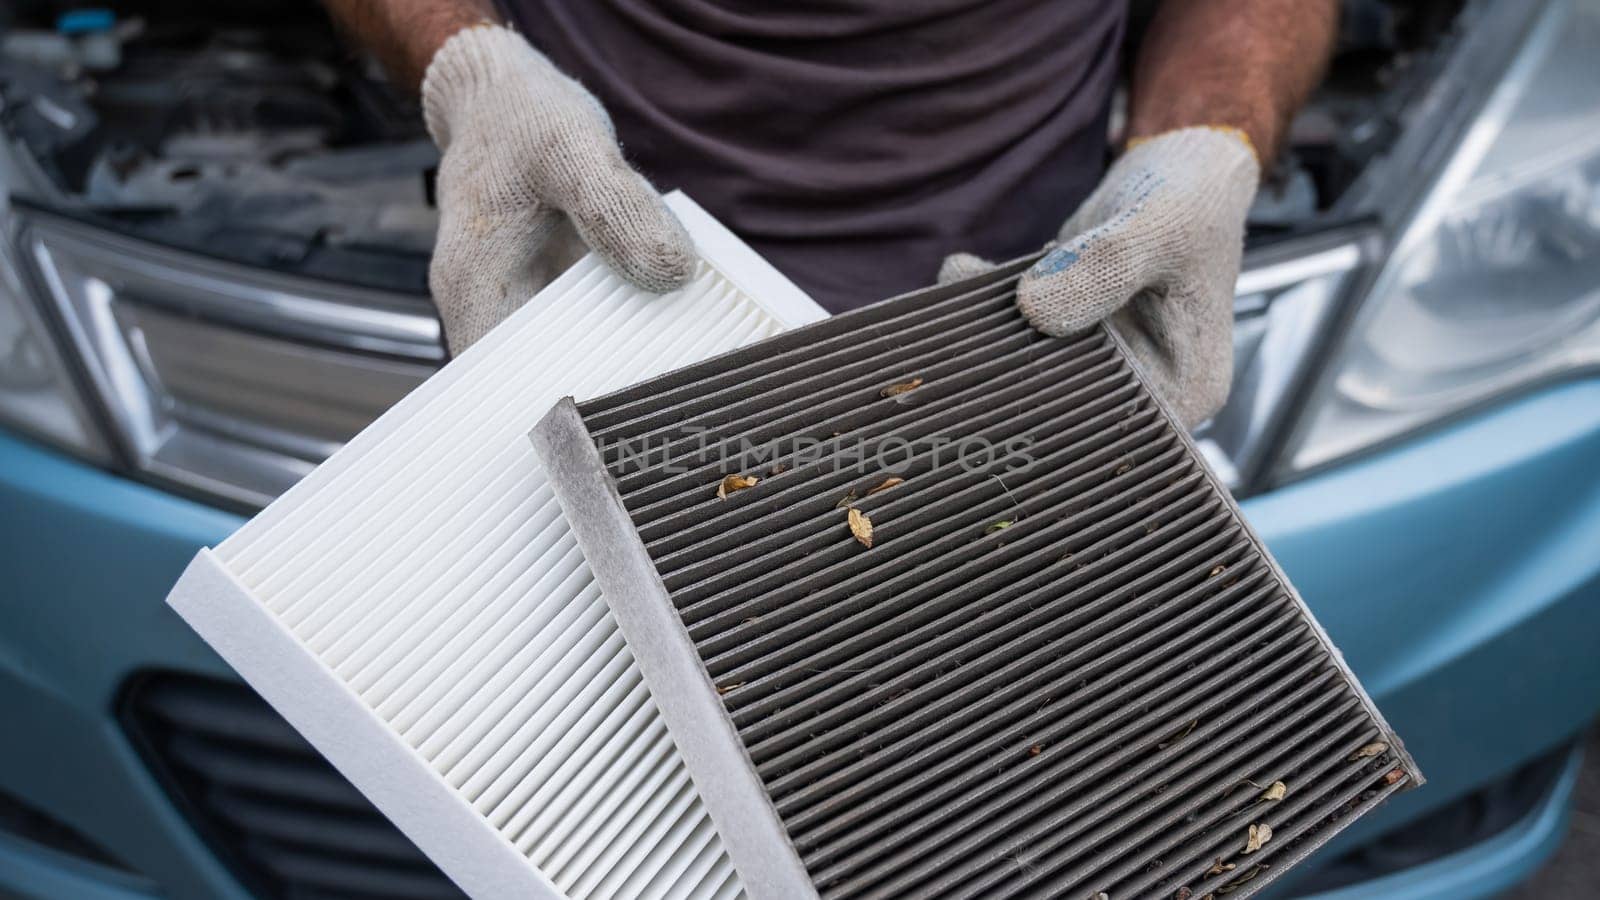 The master changes the cabin air filter of the car. by mrwed54